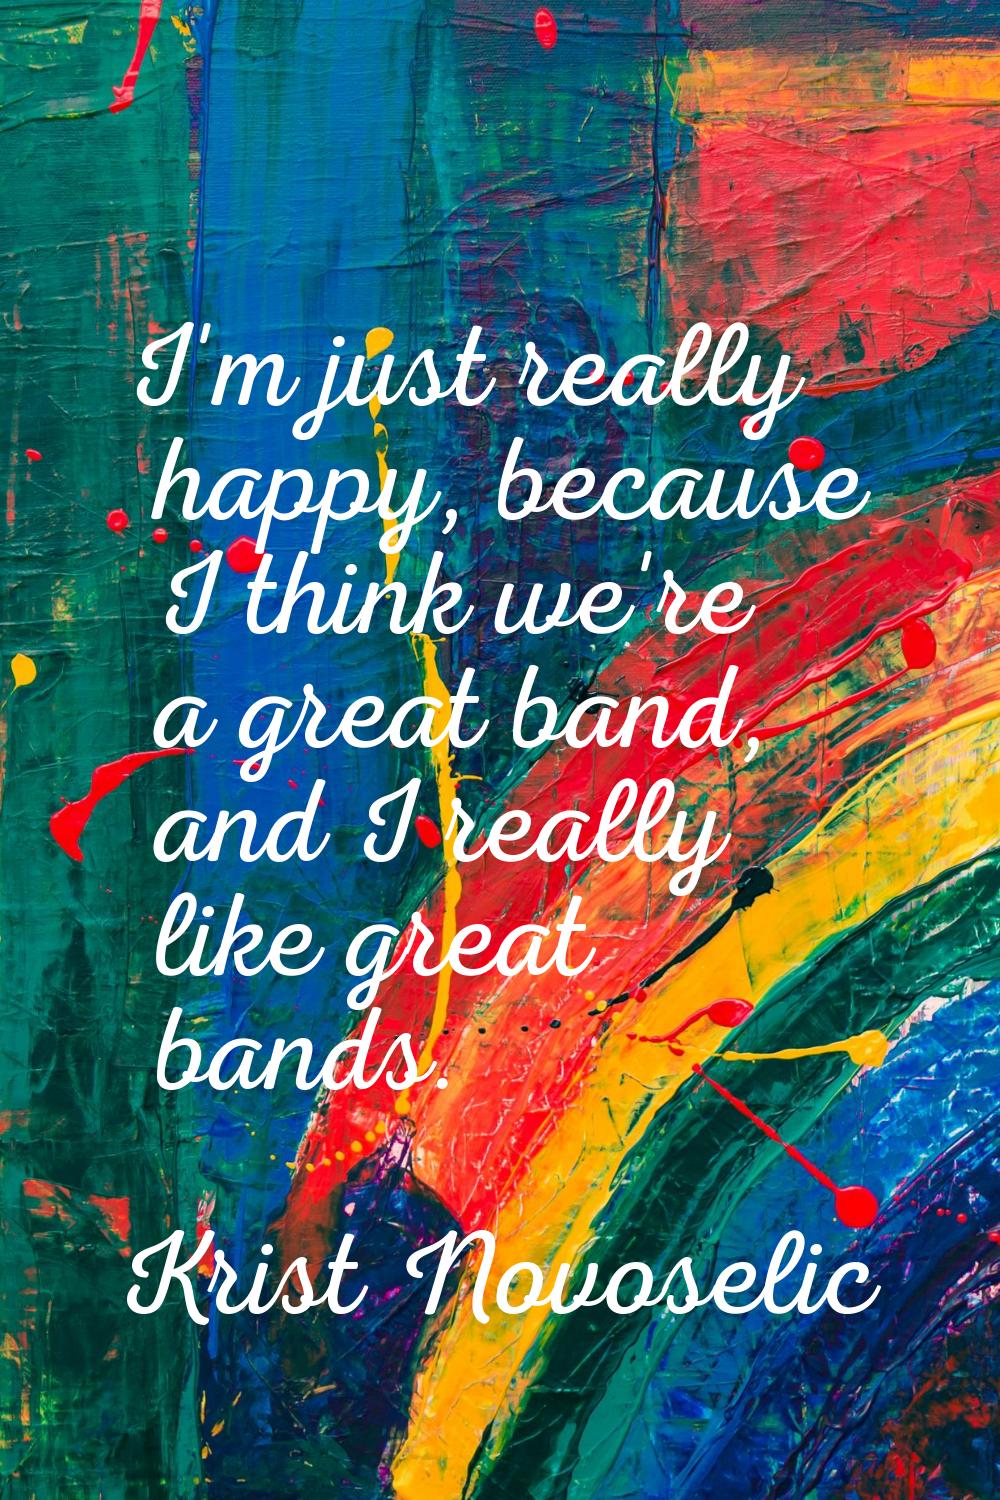 I'm just really happy, because I think we're a great band, and I really like great bands.